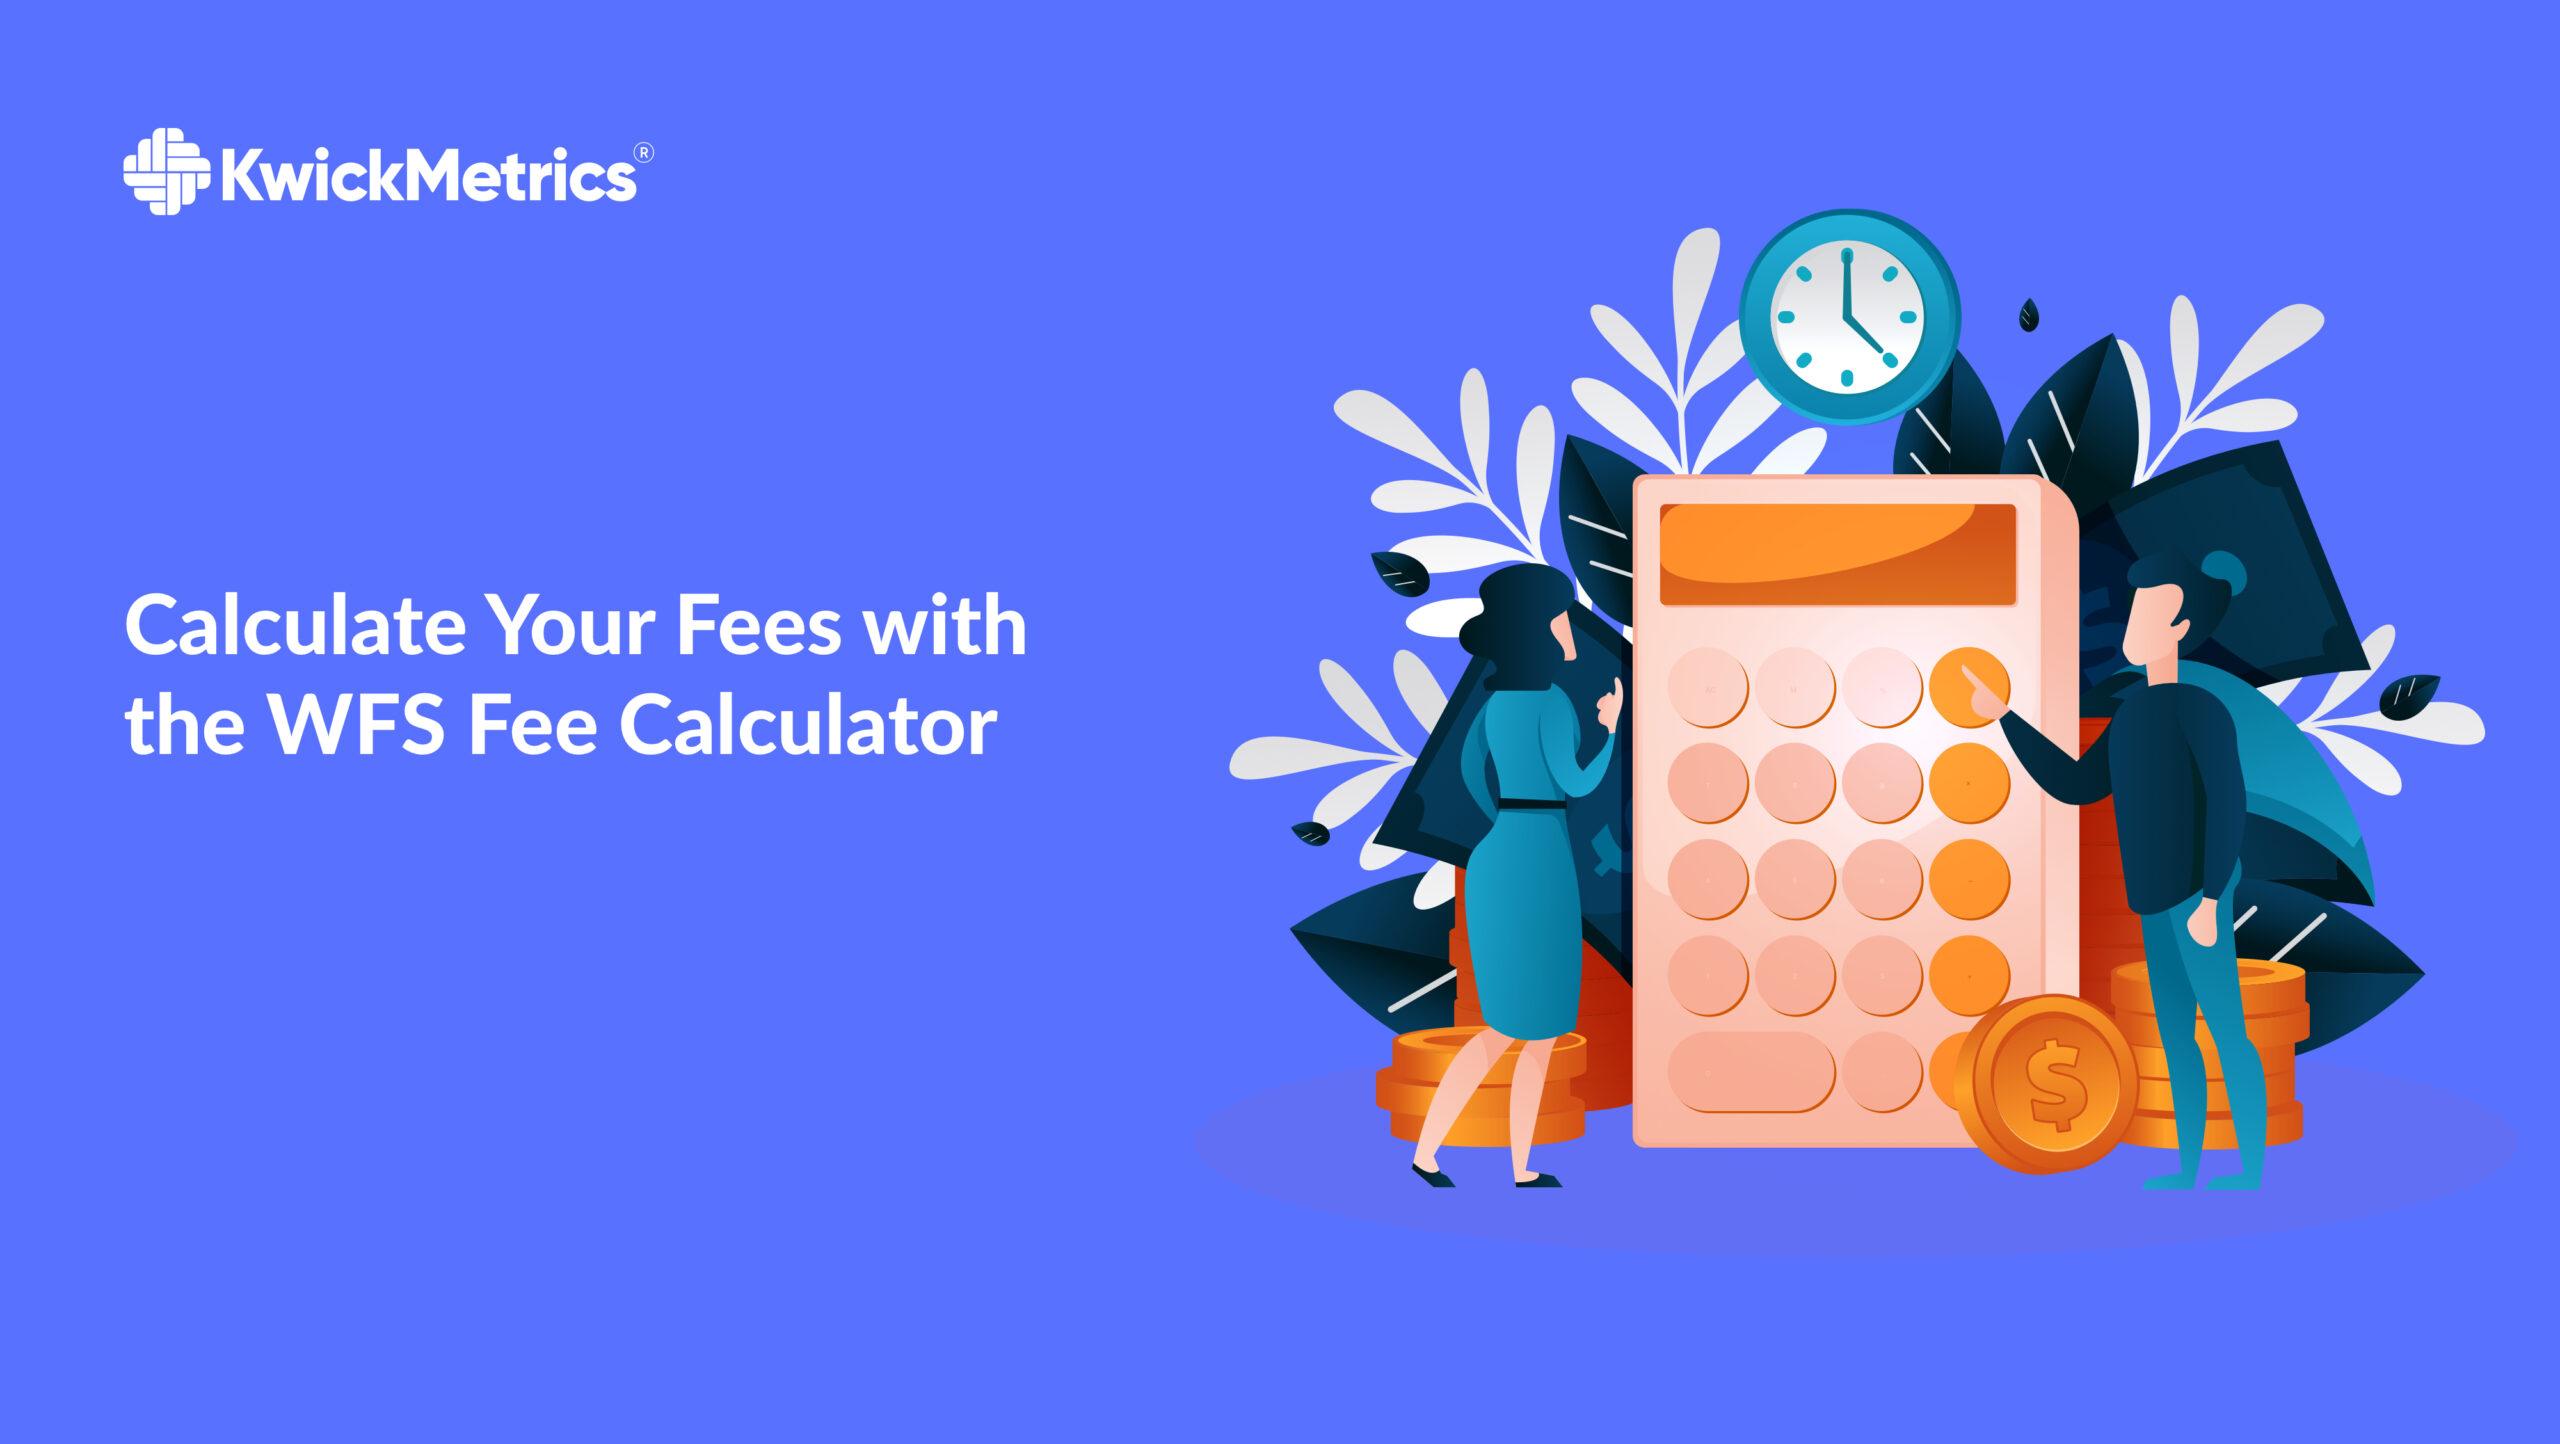 Calculate Your Fees with the WFS Fee Calculator